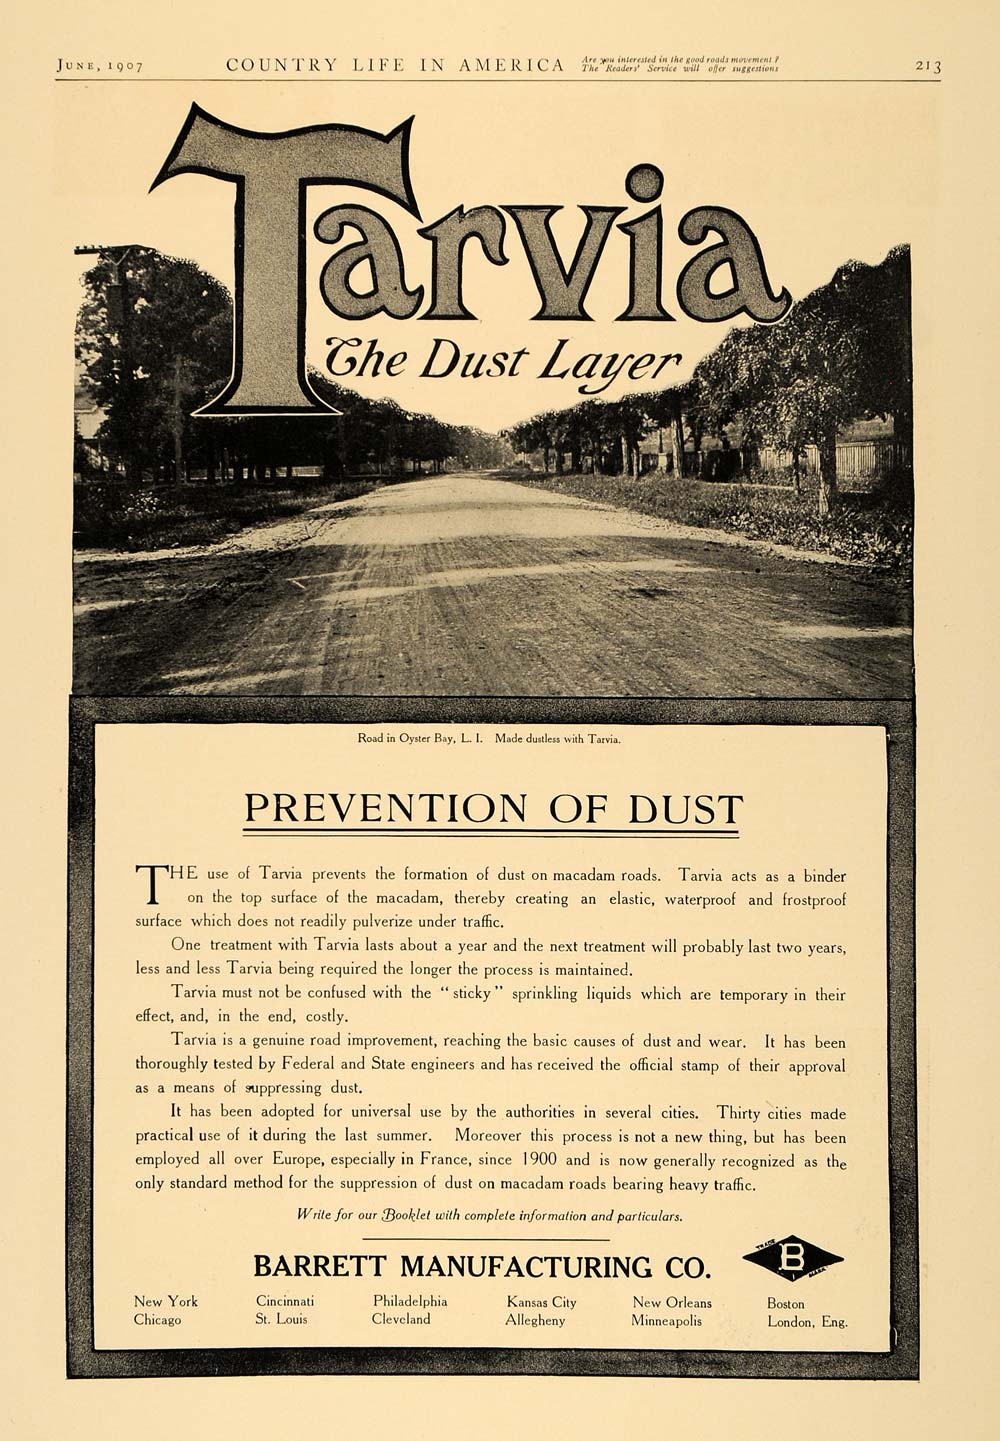 1907 Ad Barrett Manufacturing Travia Dust Oyster Bay - ORIGINAL ADVERTISING CL6